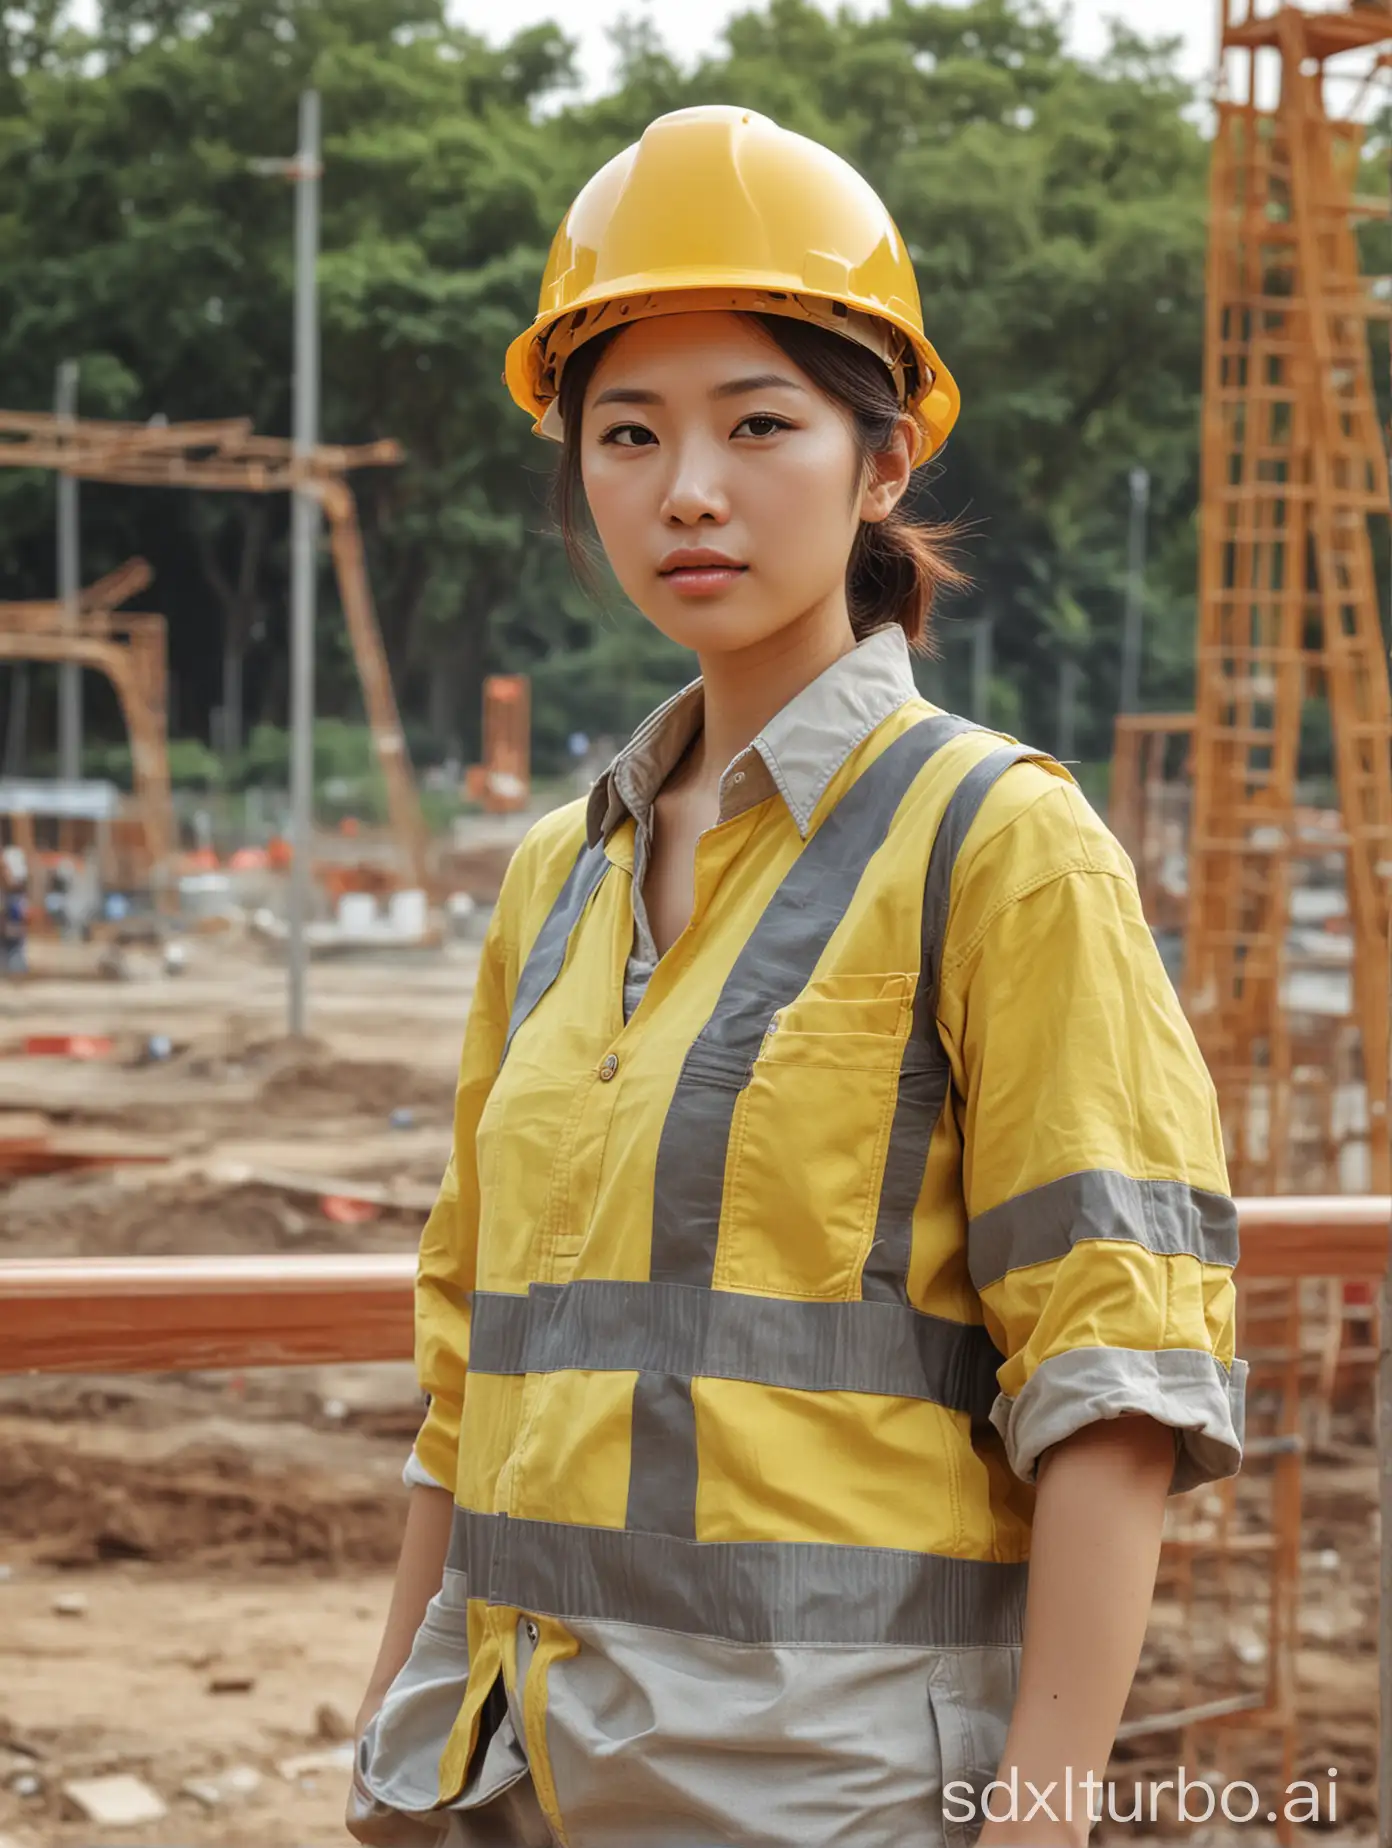 Construction-Worker-in-Safety-Gear-at-Park-Construction-Site